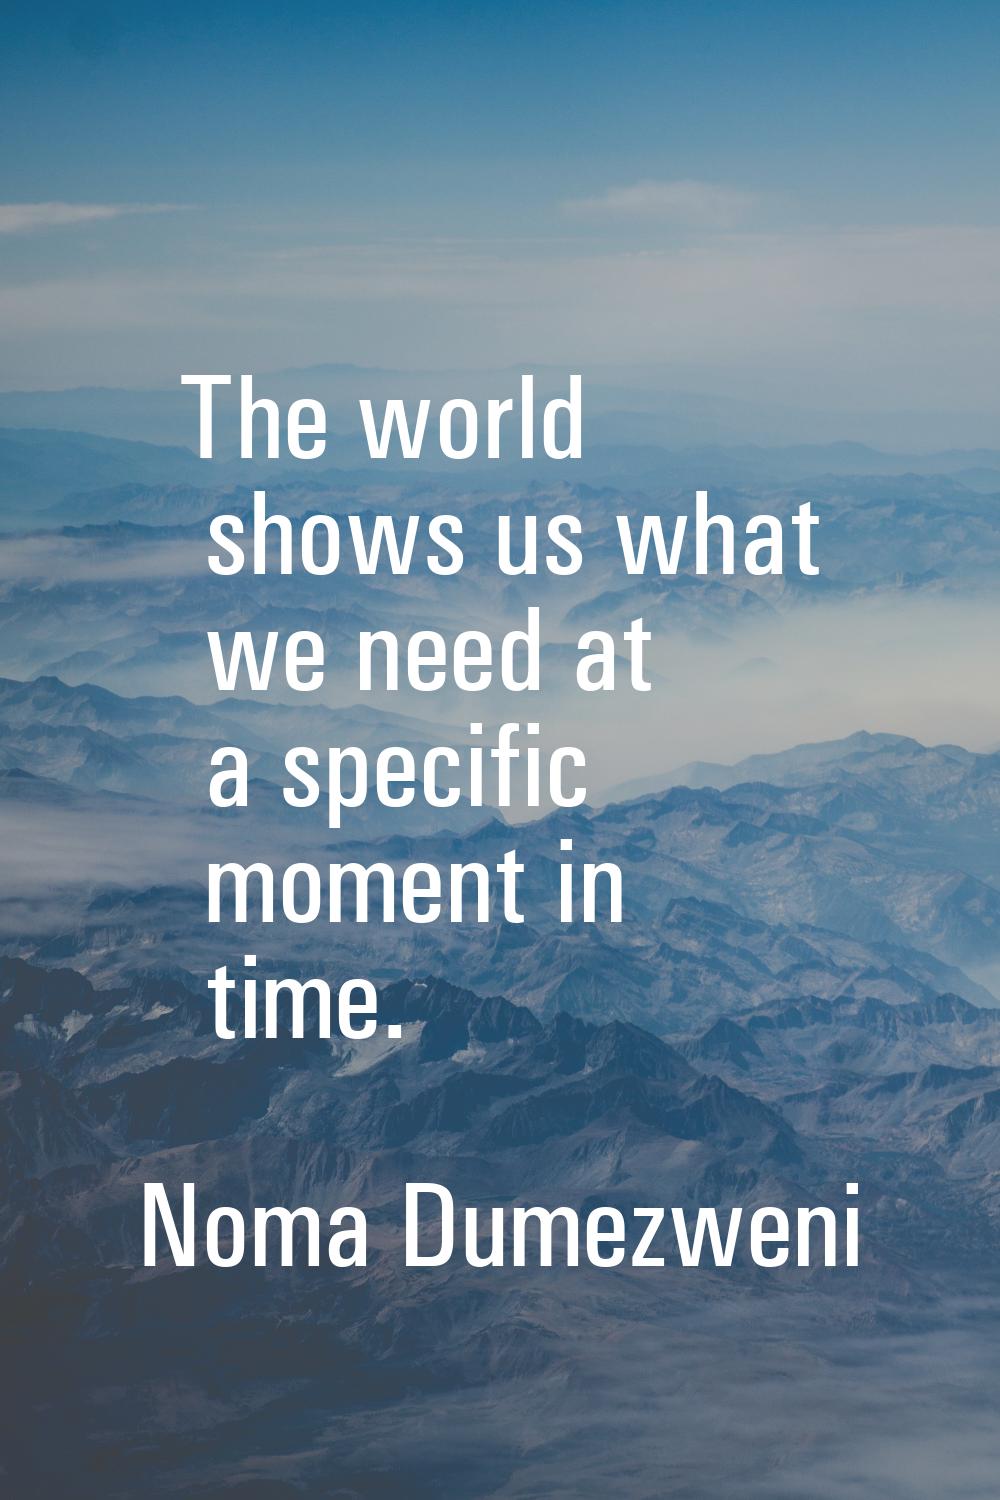 The world shows us what we need at a specific moment in time.